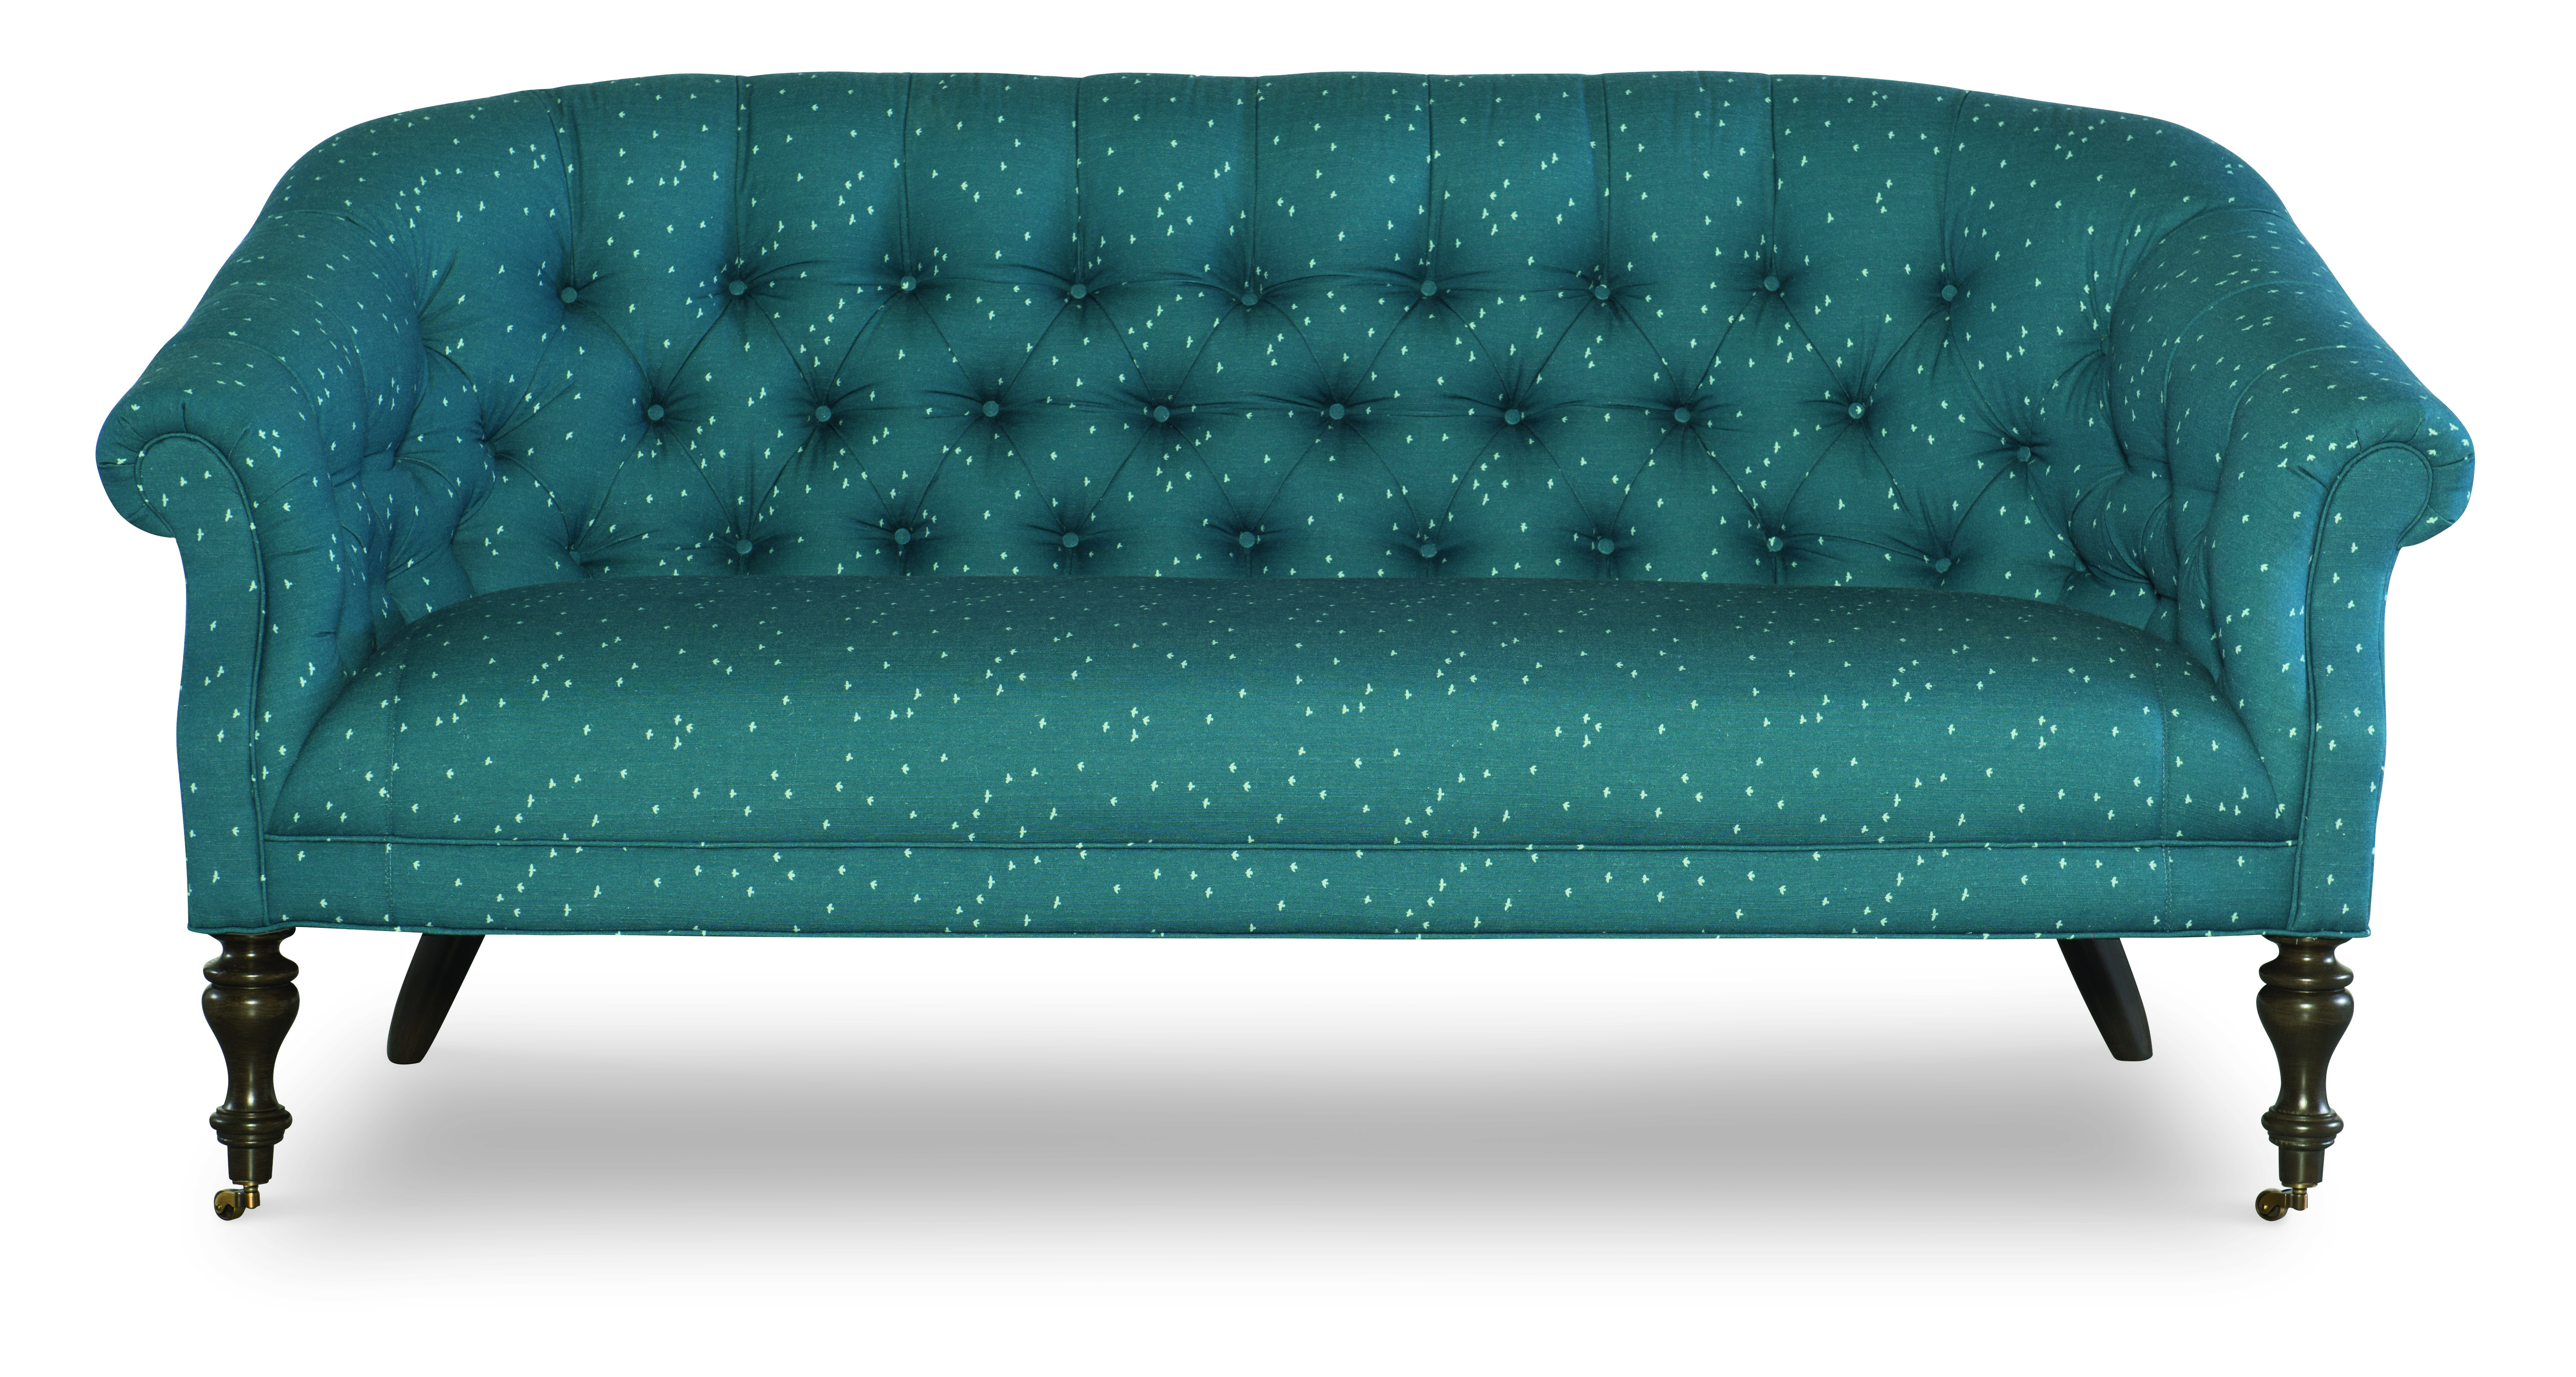 Darby settee in teal with detailed legs from CR Laine 